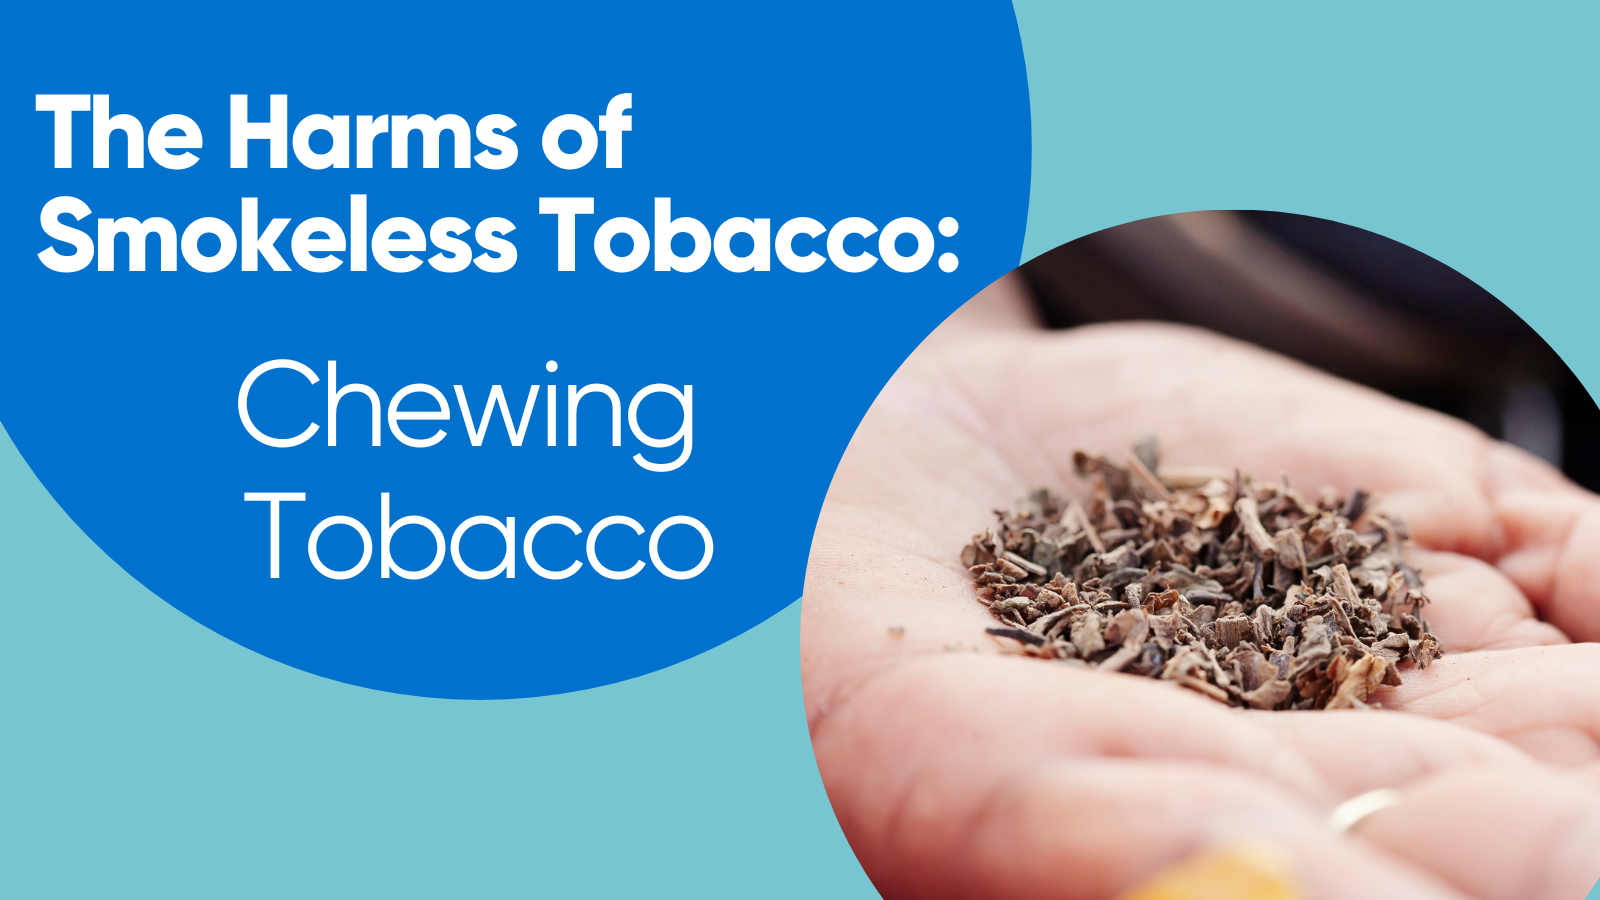 The Harms of Smokeless Tobacco: Chewing Tobacco